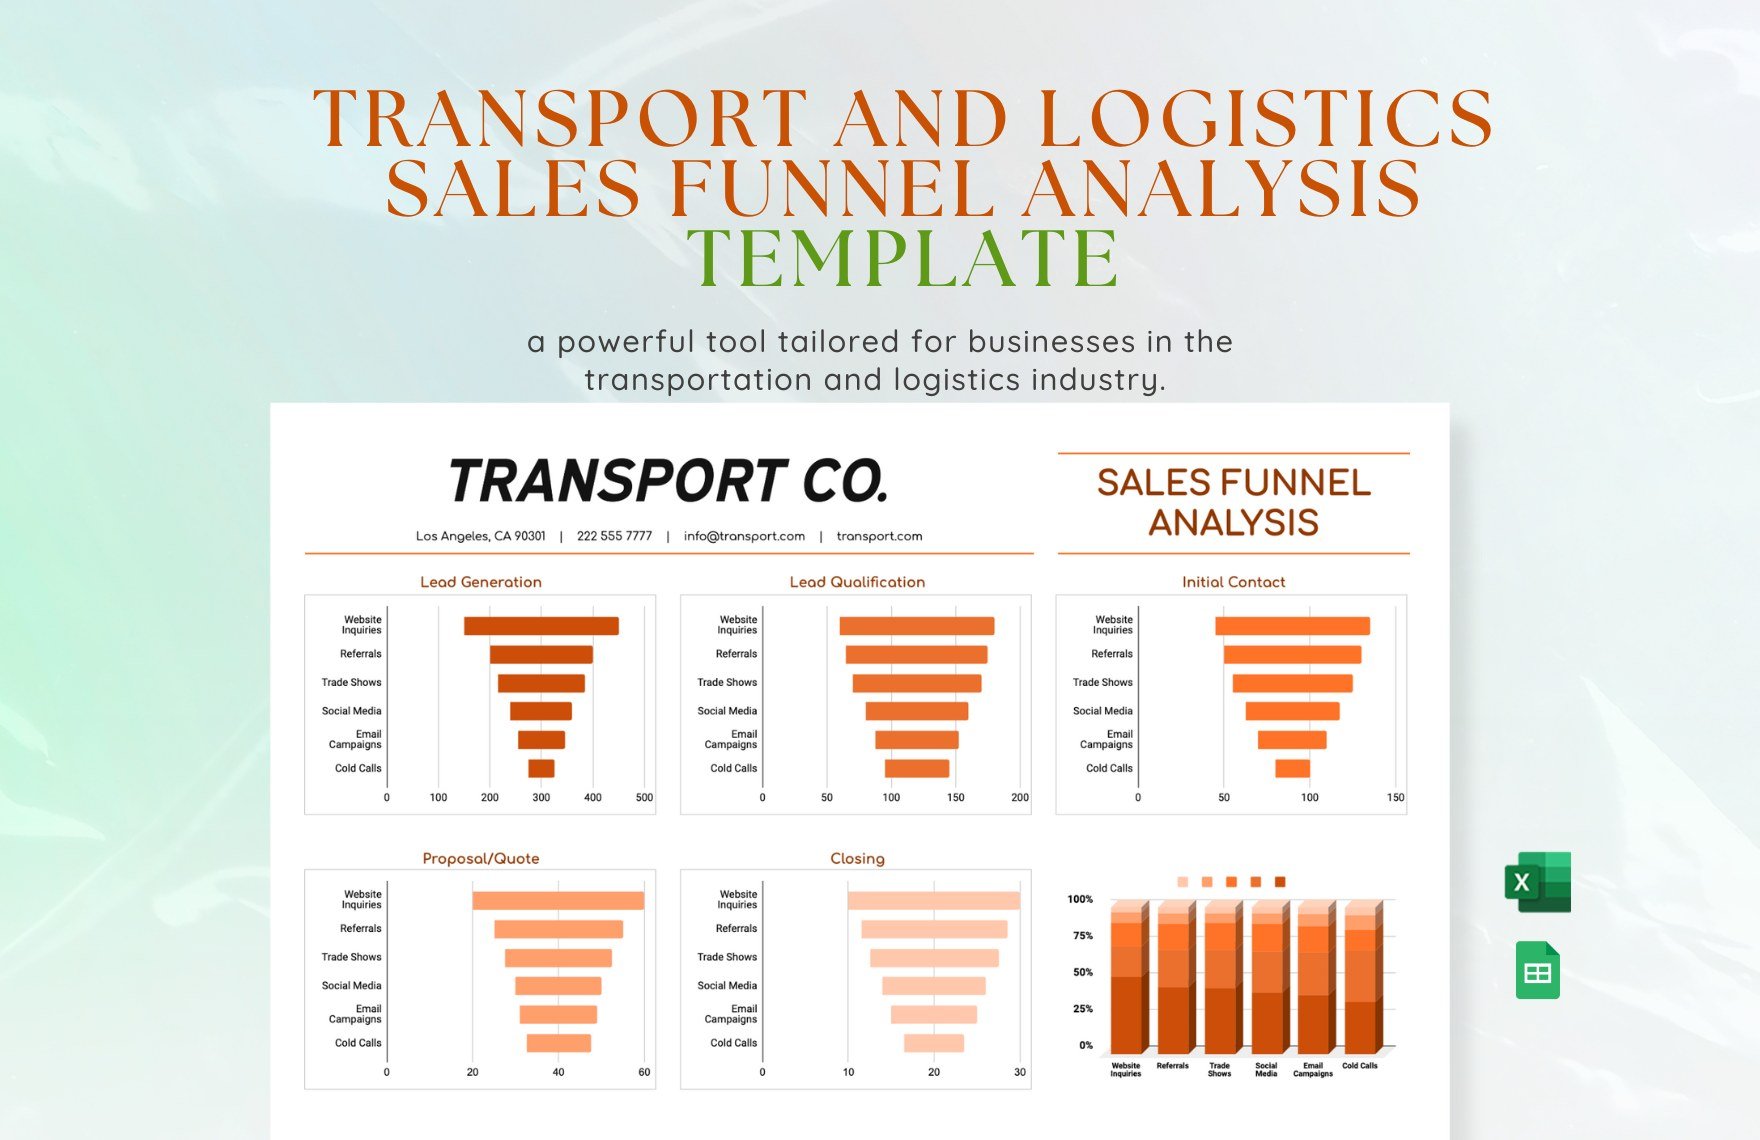 Free Transport and Logistics Sales Funnel Analysis Template in Excel, Google Sheets